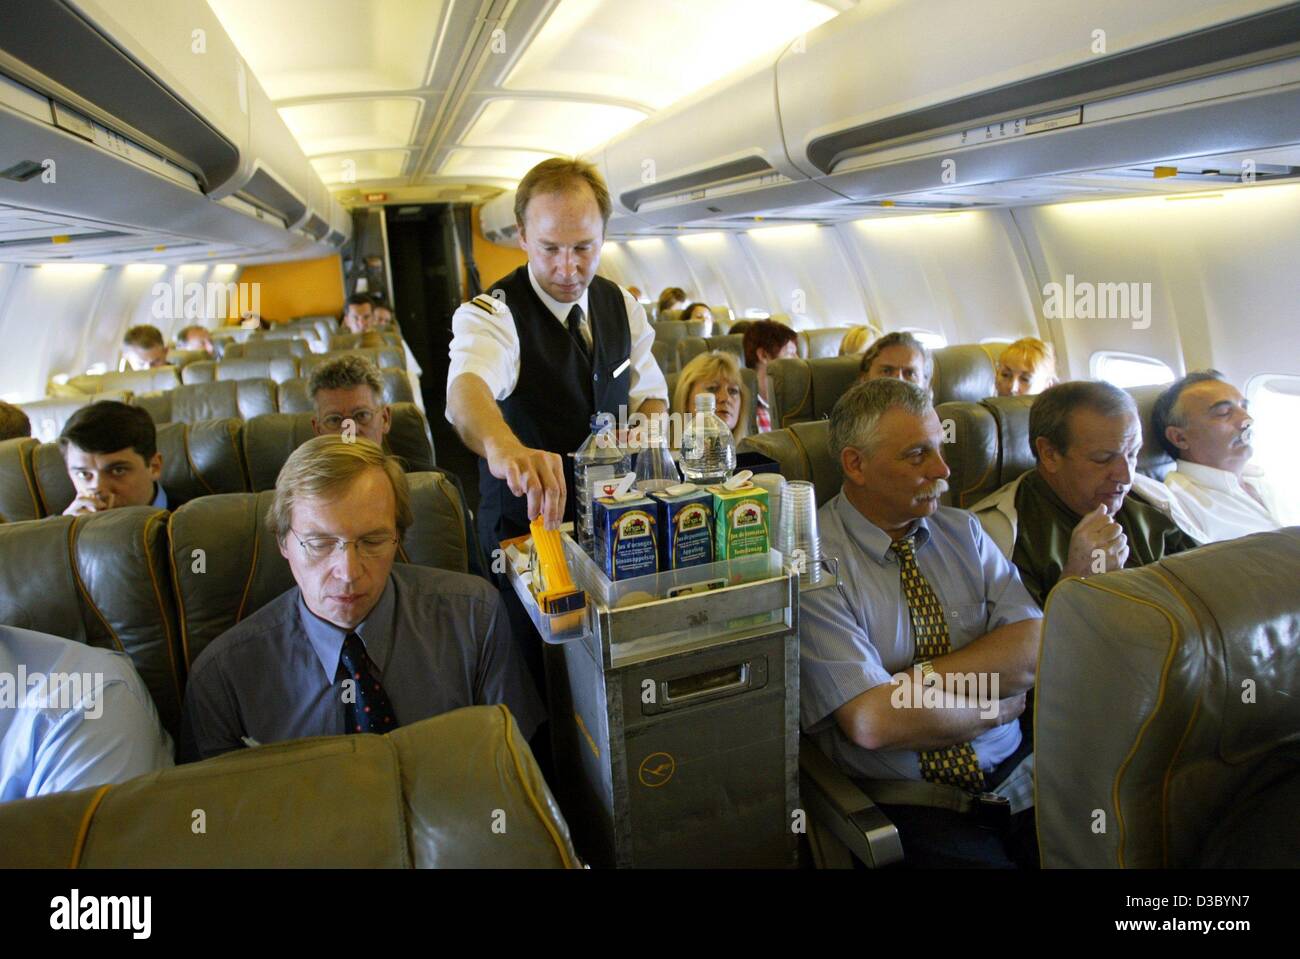 (dpa) - A steward of the Deutsche Lufthansa airline offers passengers a drink during a flight from Dessau, Germany, 17 July 2003. Stock Photo